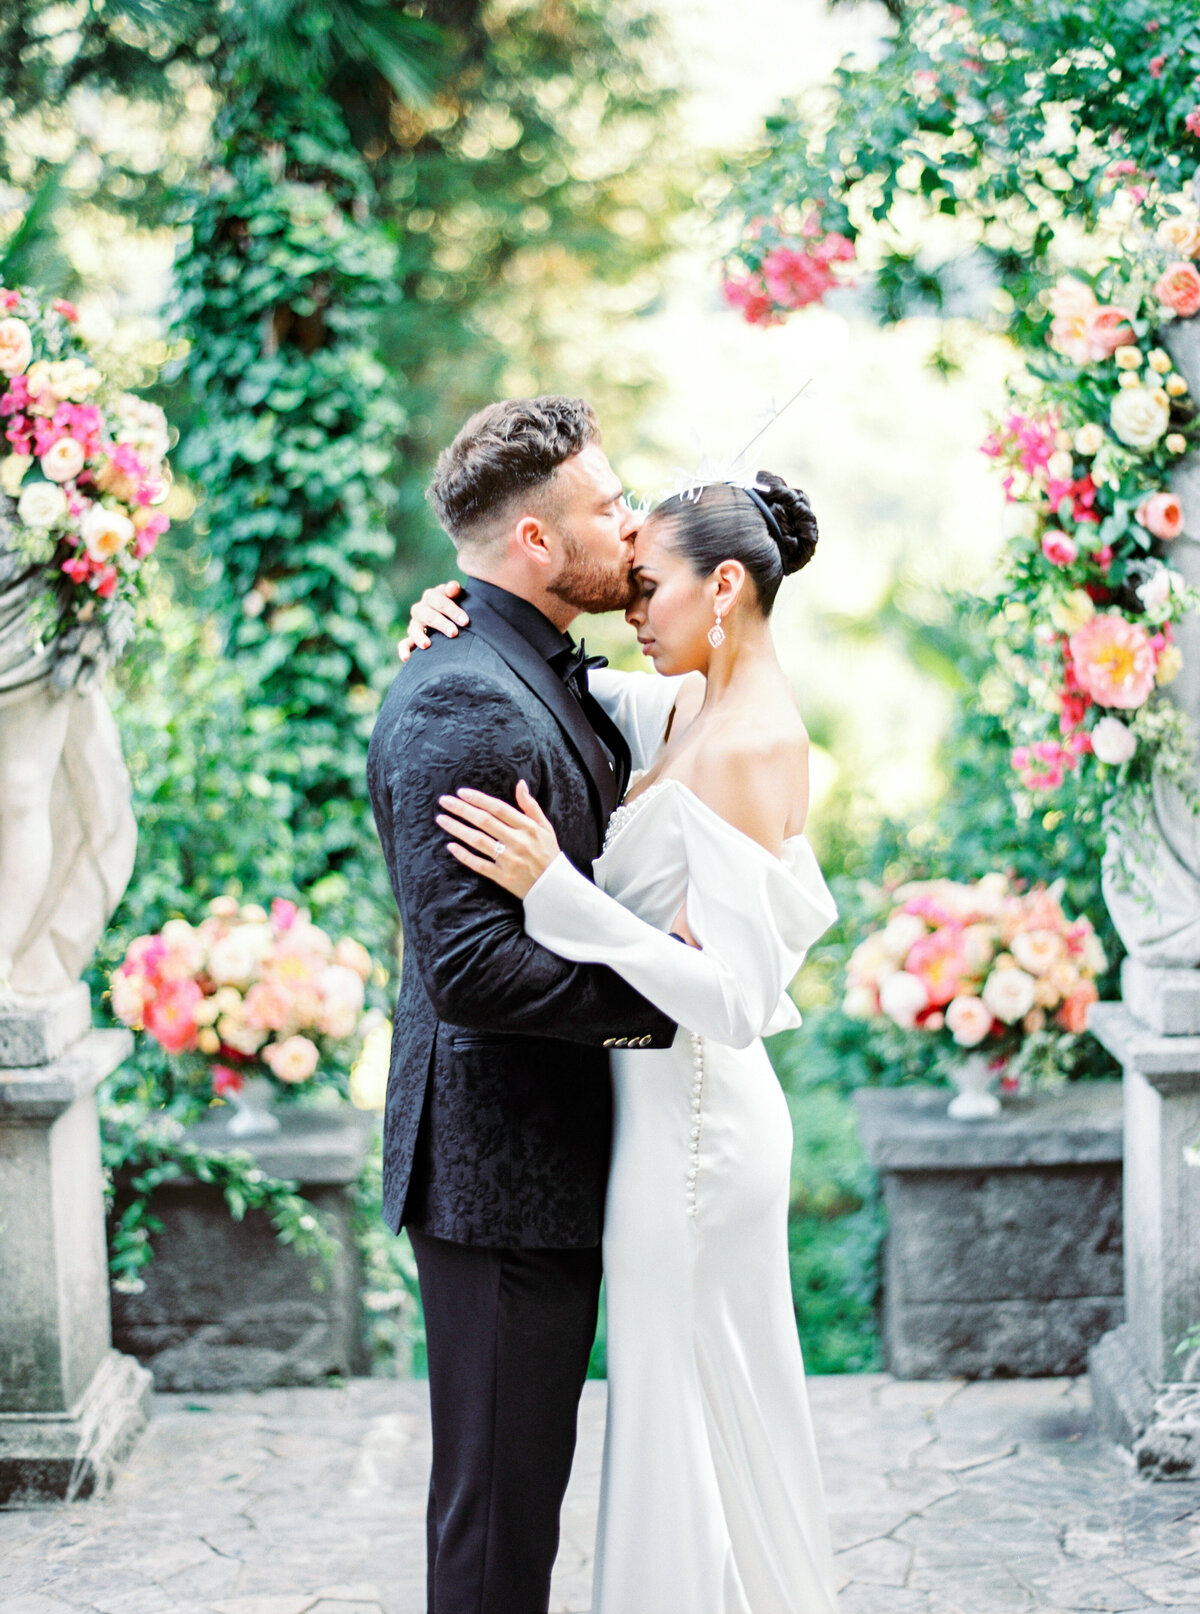 Bride and groom portraits at their Lake Como wedding photographed by Lake Como Wedding photographer